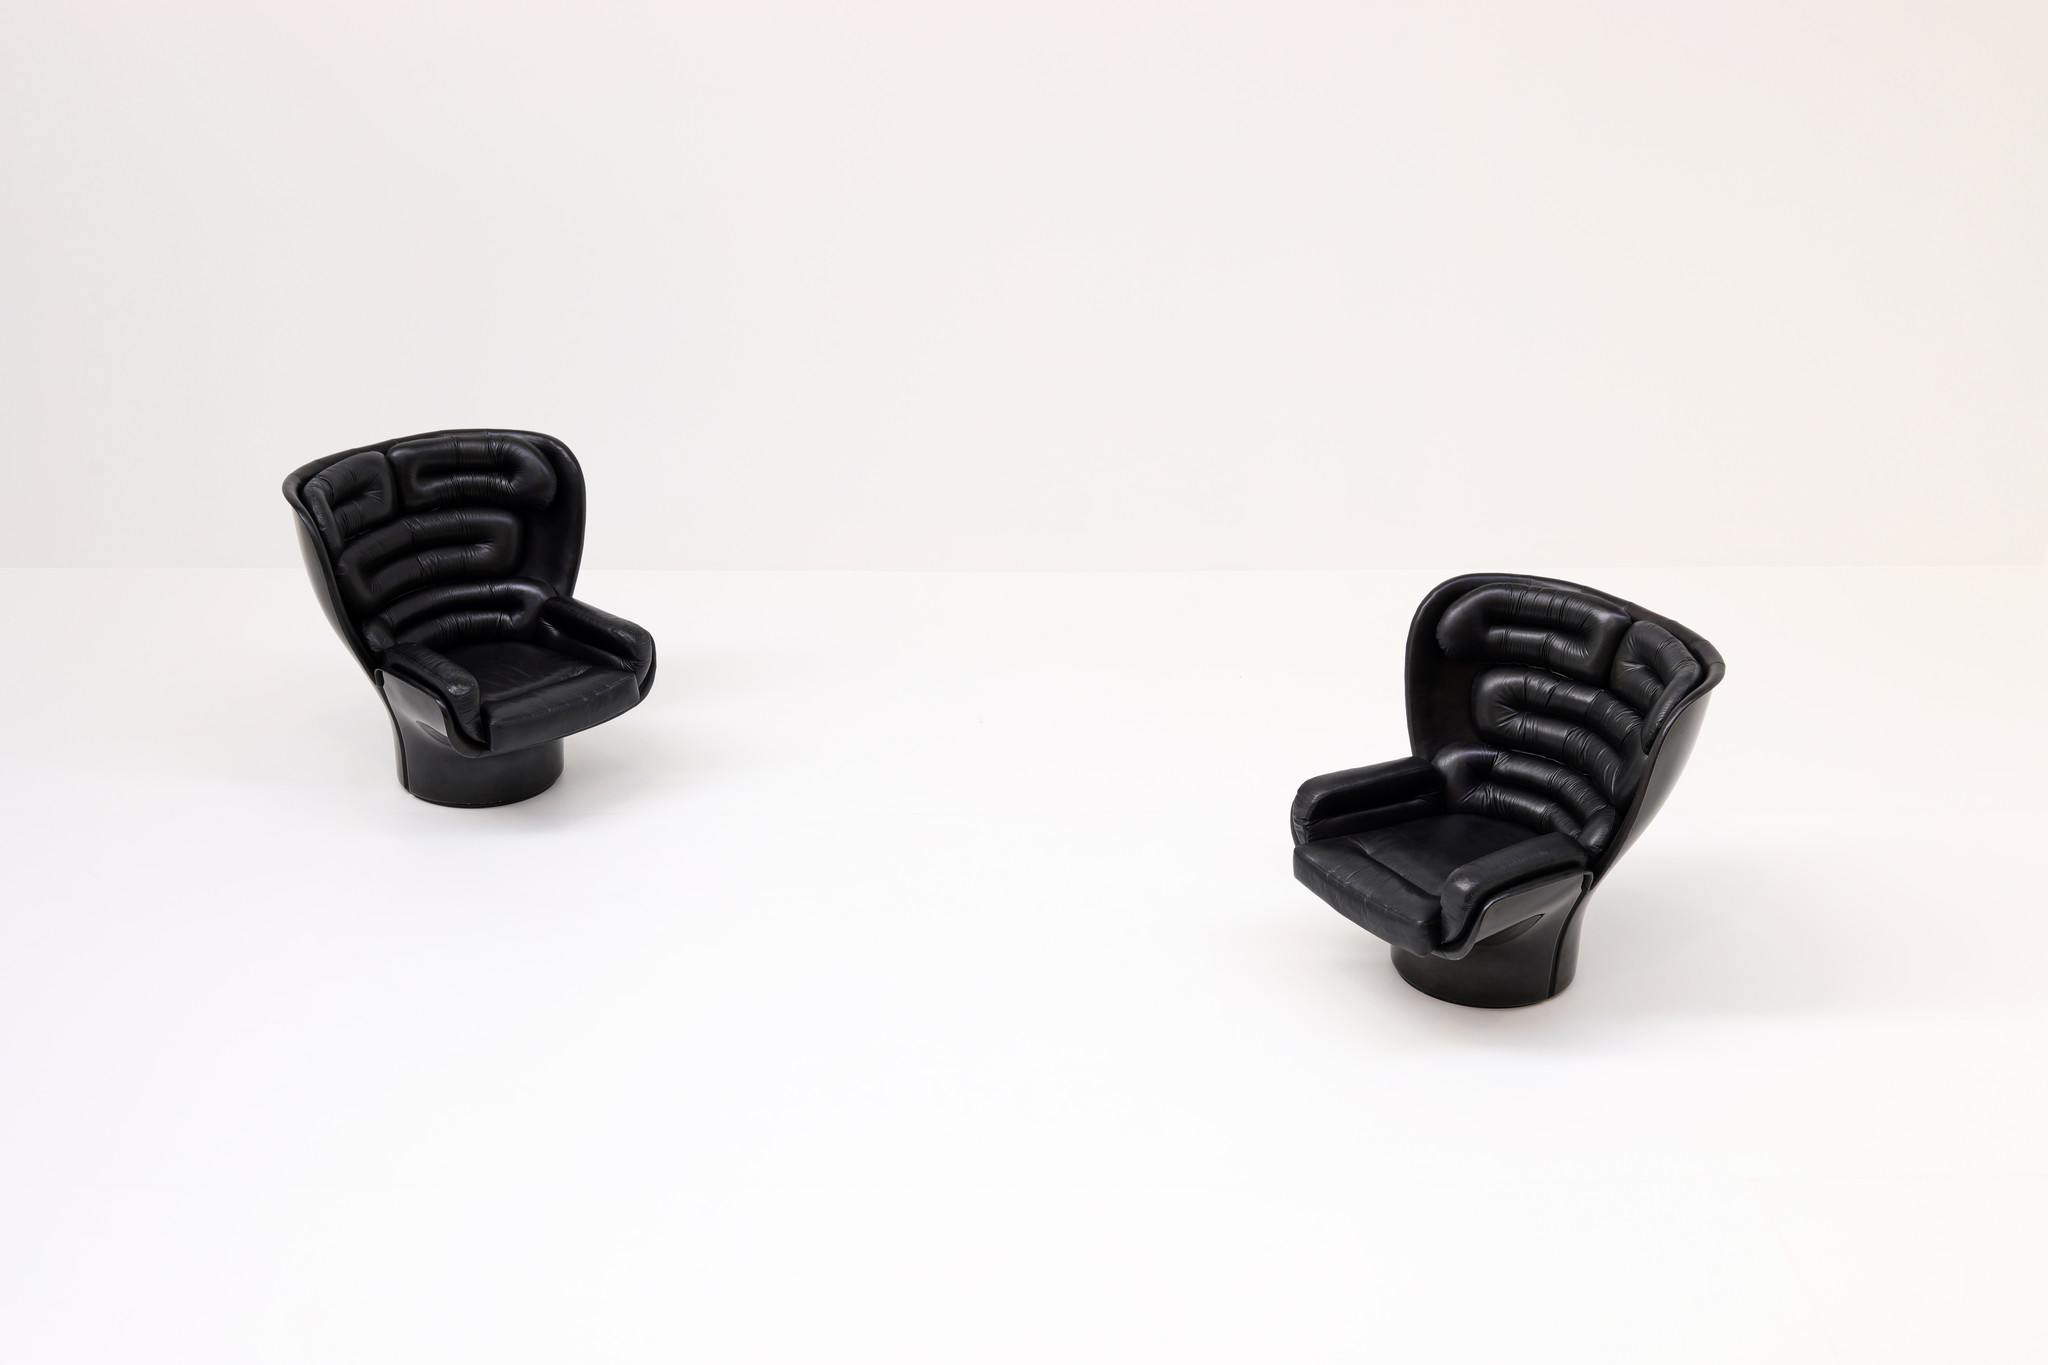 Elda Chairs designed by Joe Colombo for comfort.